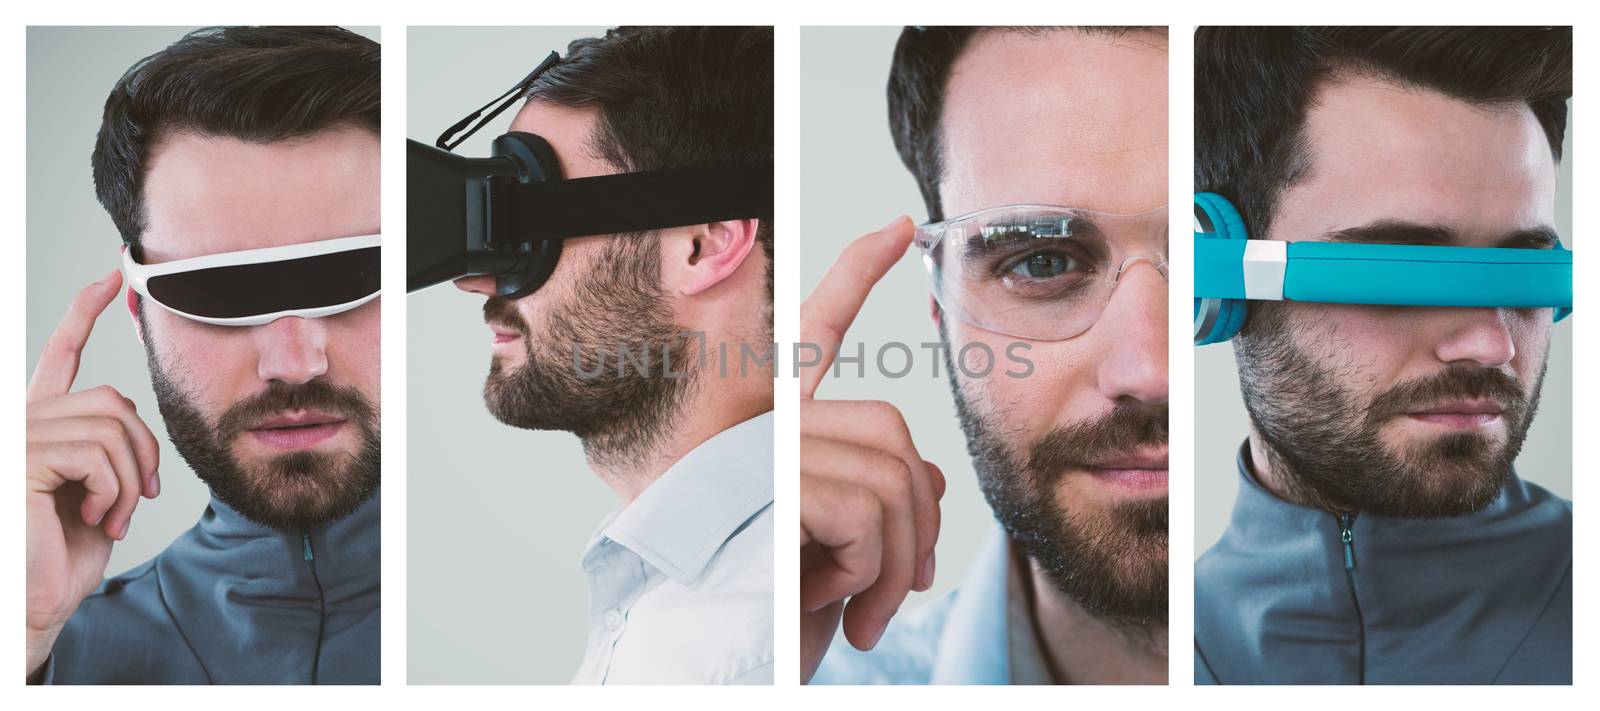 Man using virtual reality glasses against white background